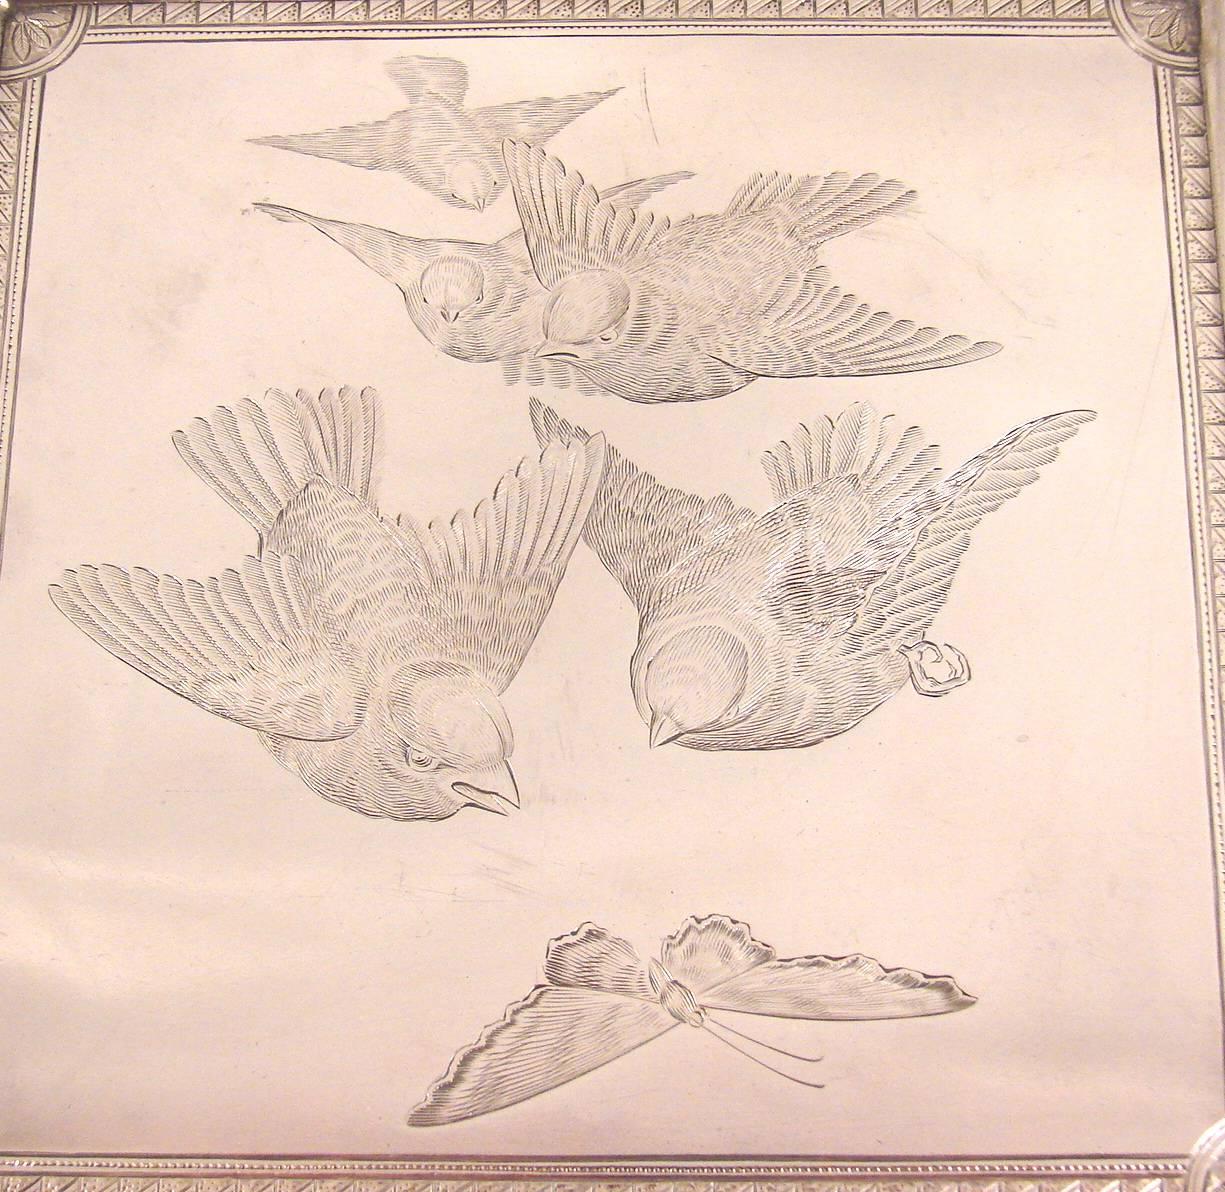 An American sterling silver engraved tray depicting birds and a butterfly in flight with a gadrooned border made by the Frank Whiting Company, impressed on reverse with the Whiting hallmark stamped sterling. Monogrammed on back in script A.H.T. from